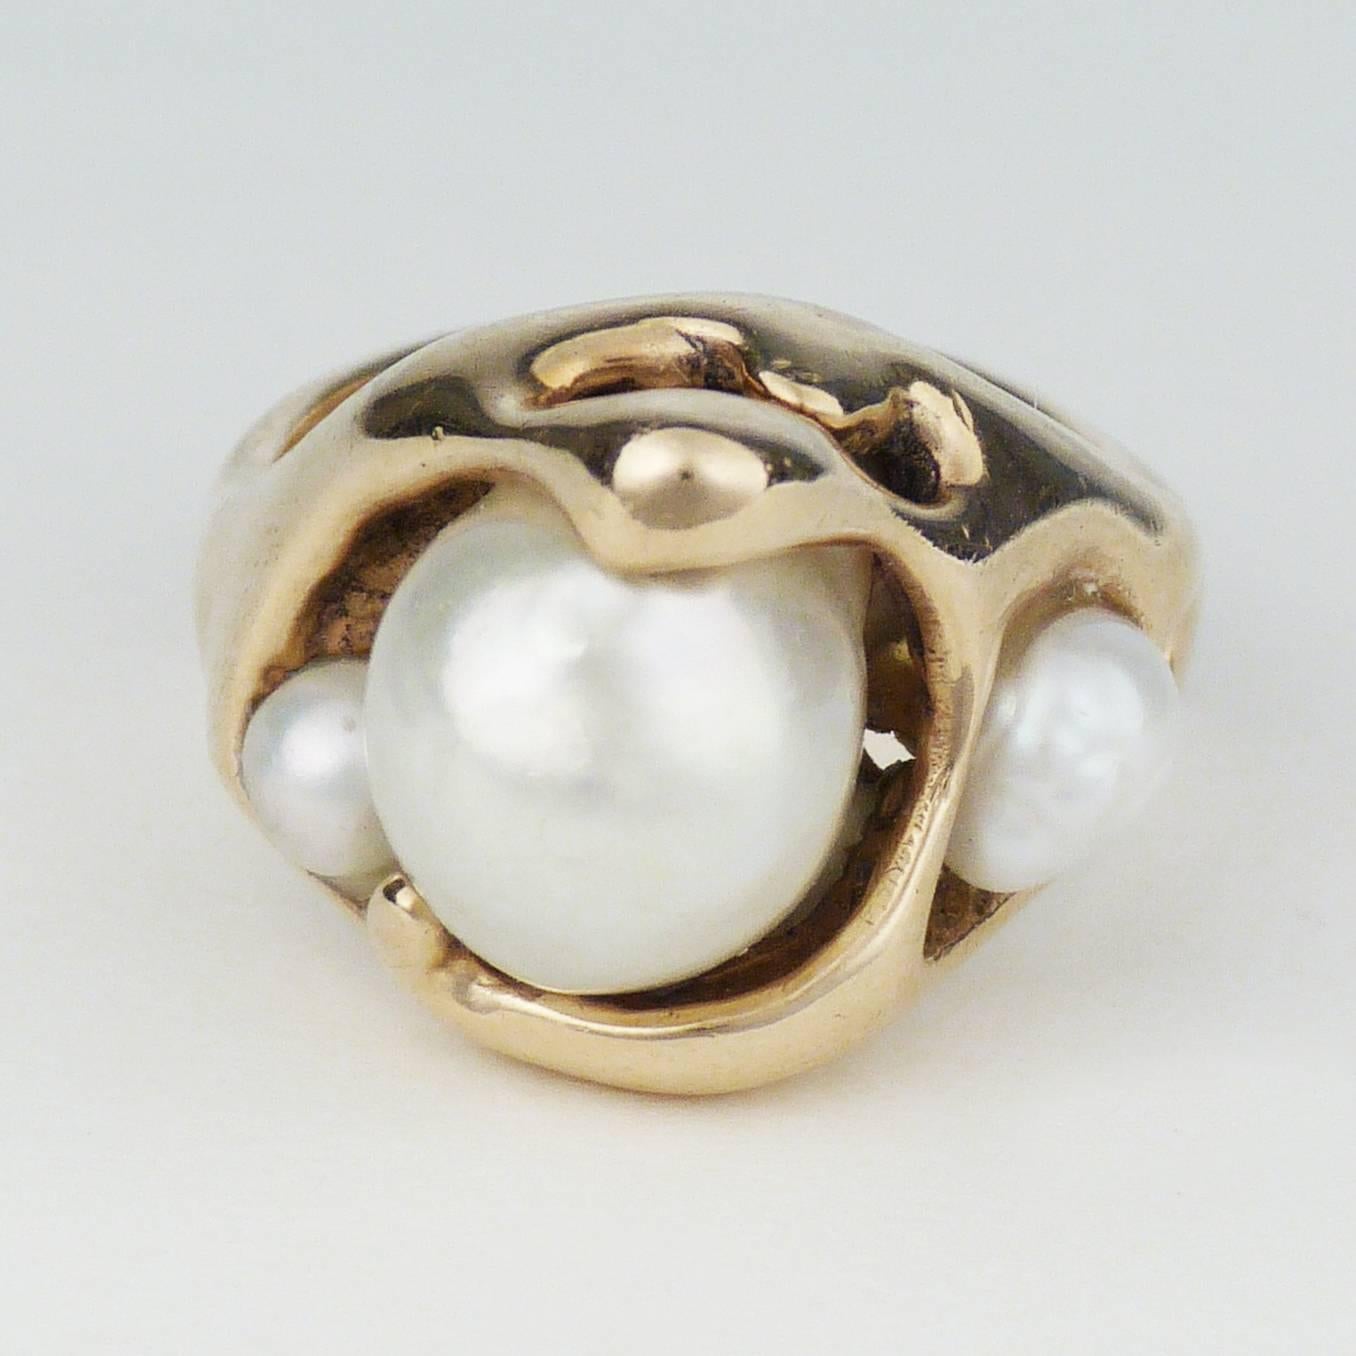 An exquisite piece by Hopi master Charles Loloma, created by using the lost wax technique of casting. The sinuous form mirrors gold in its liquid state. Three pearls. Signature was etched by the artist. Ring size 6.25.